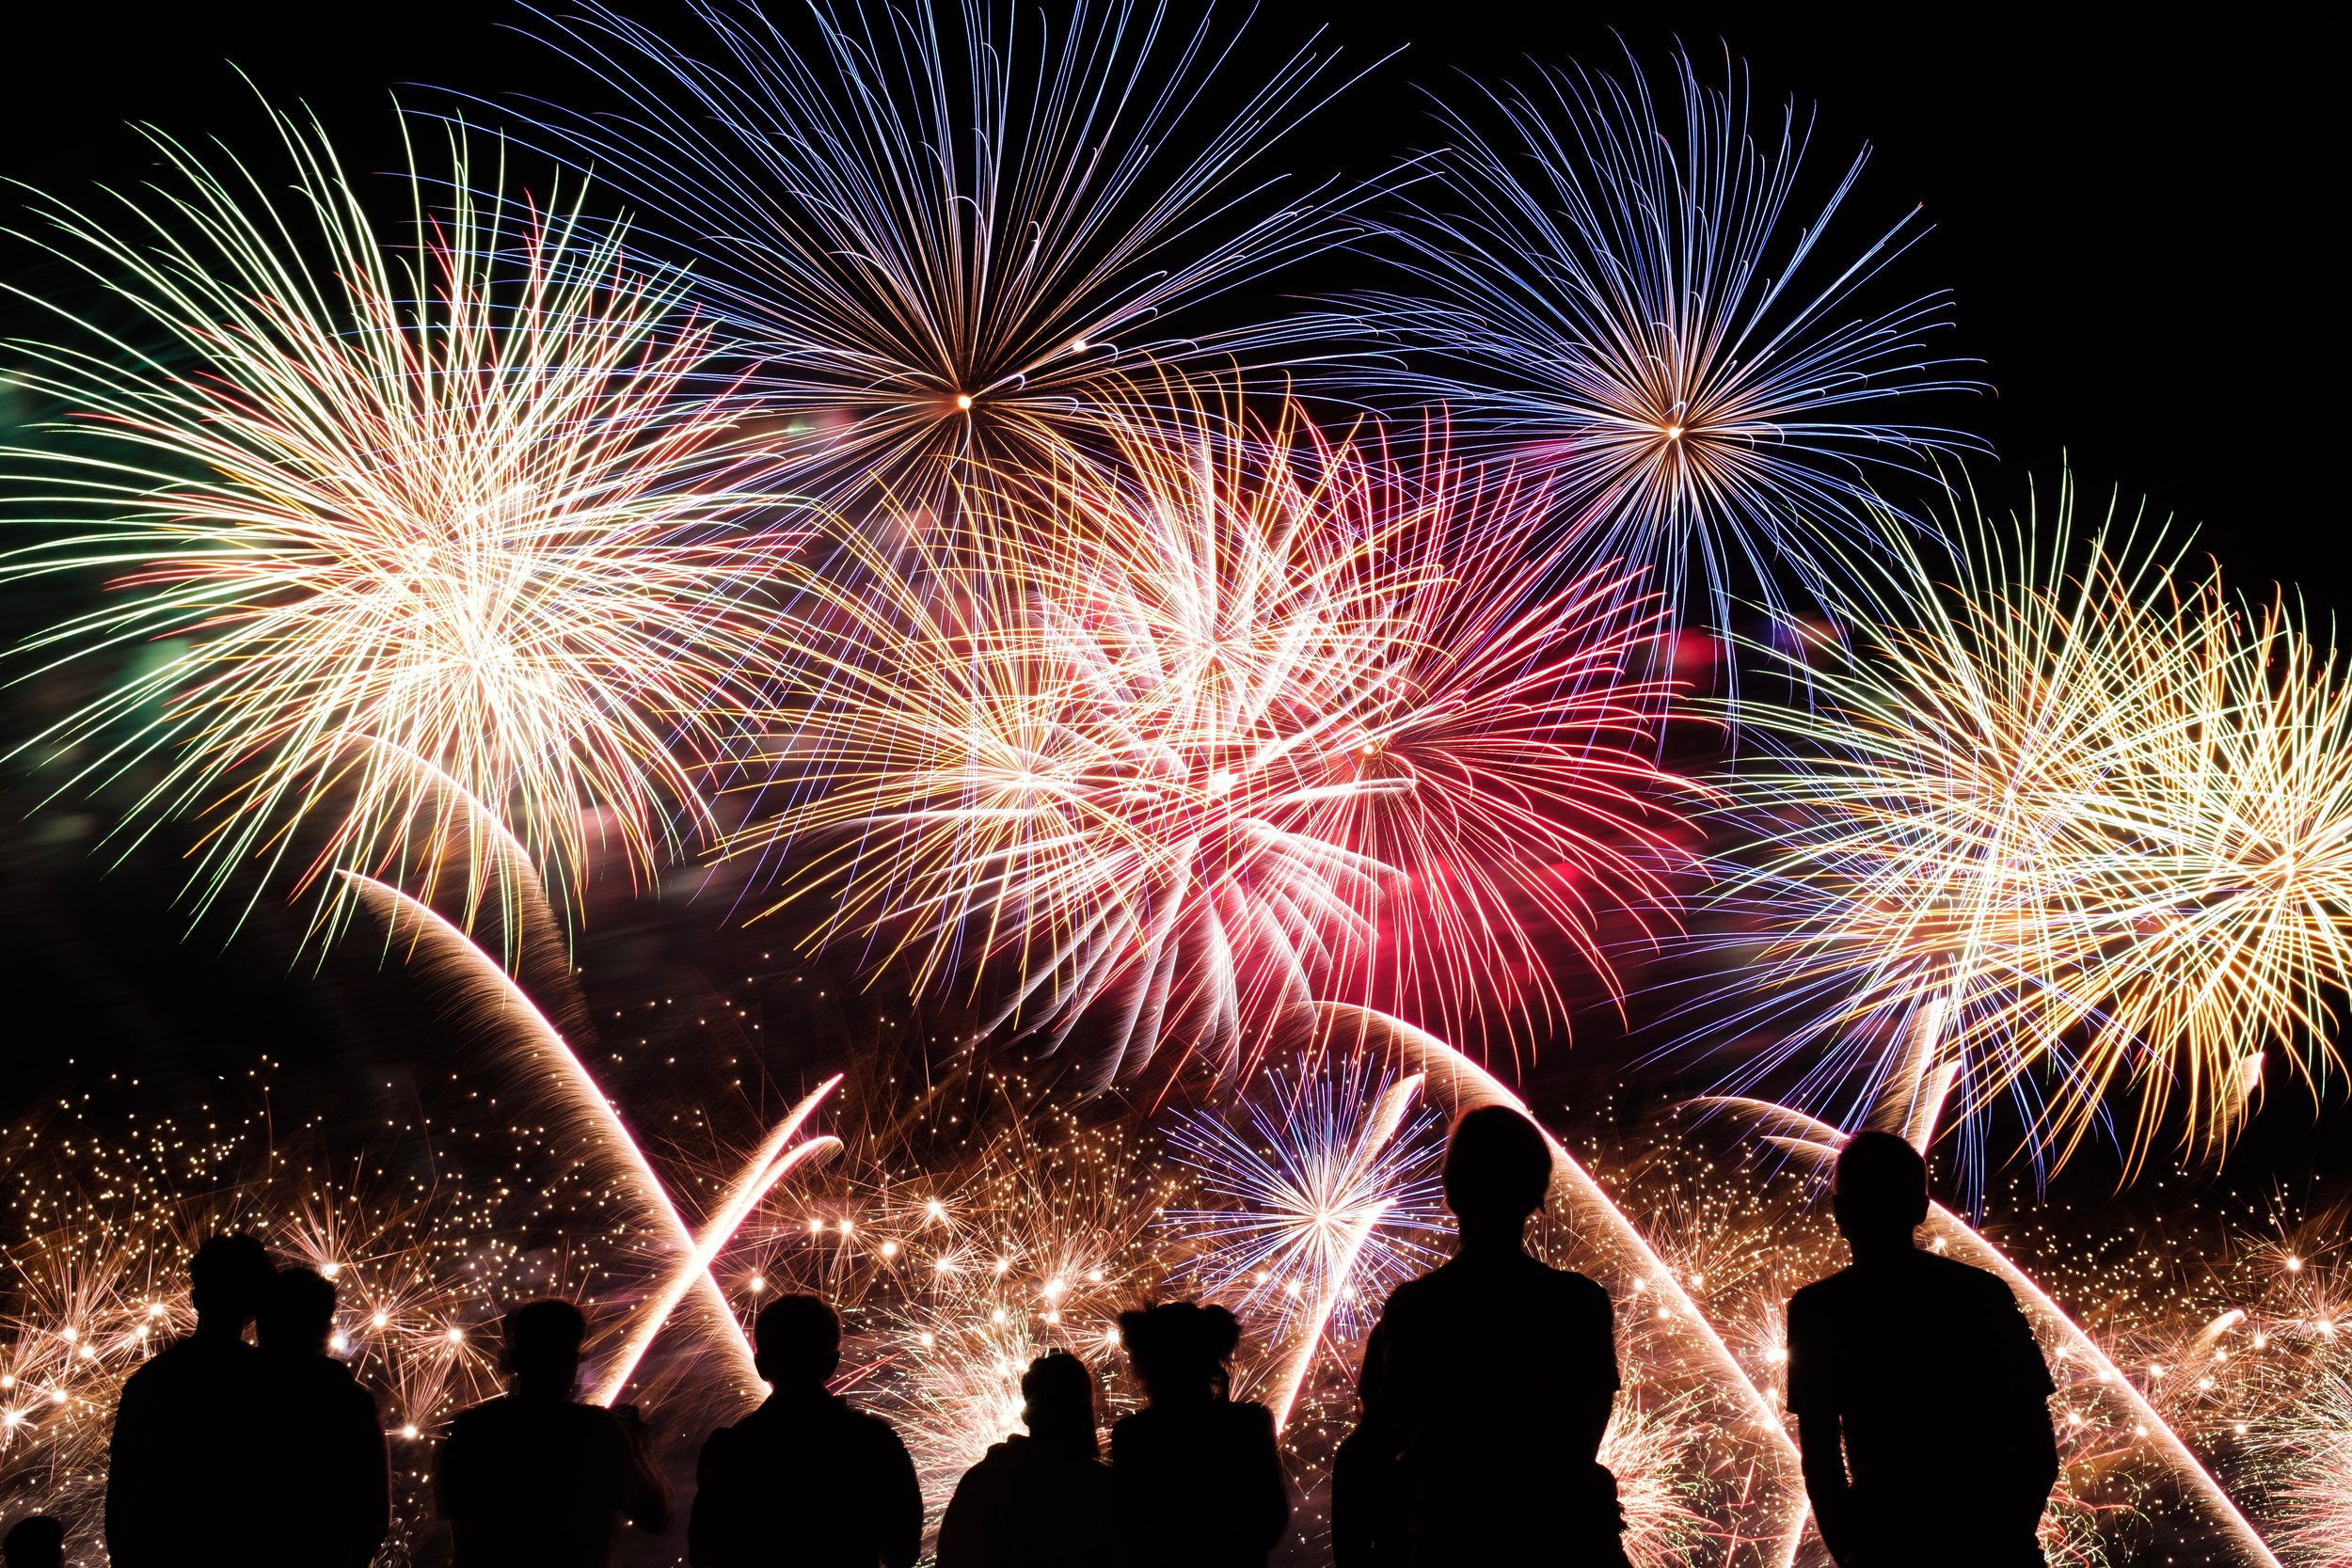 Sell tickets online to your bonfire night events with Ticket Tailor